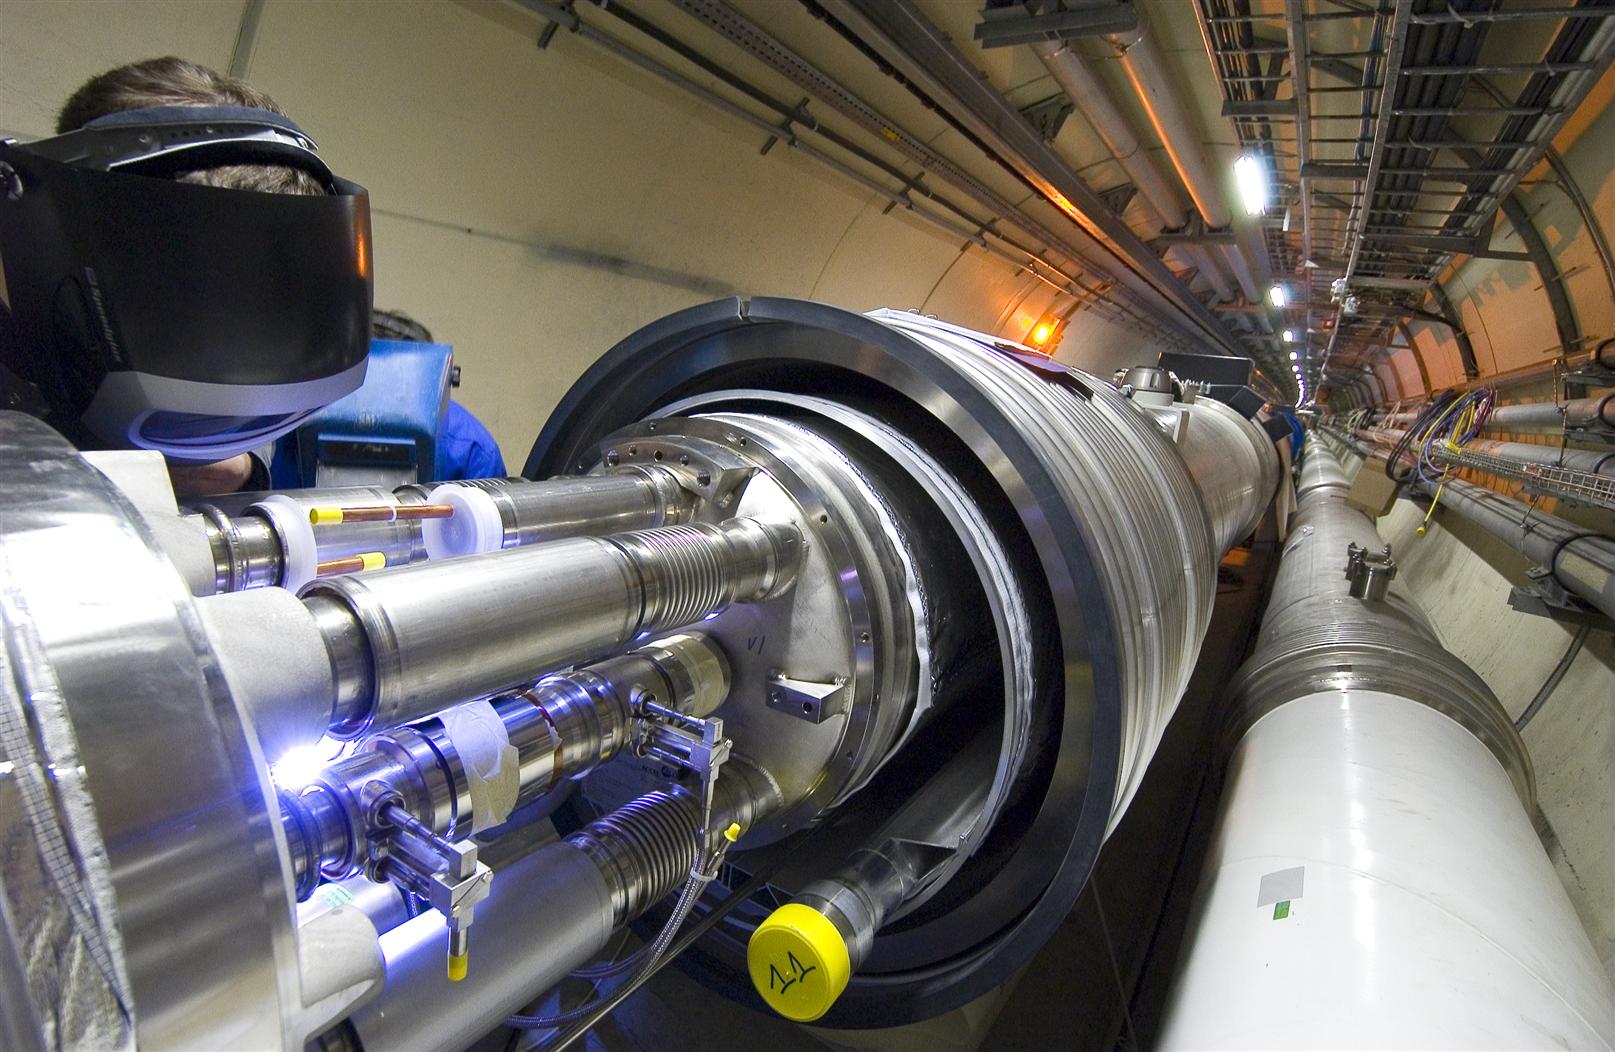 The first interconnection of the LHC